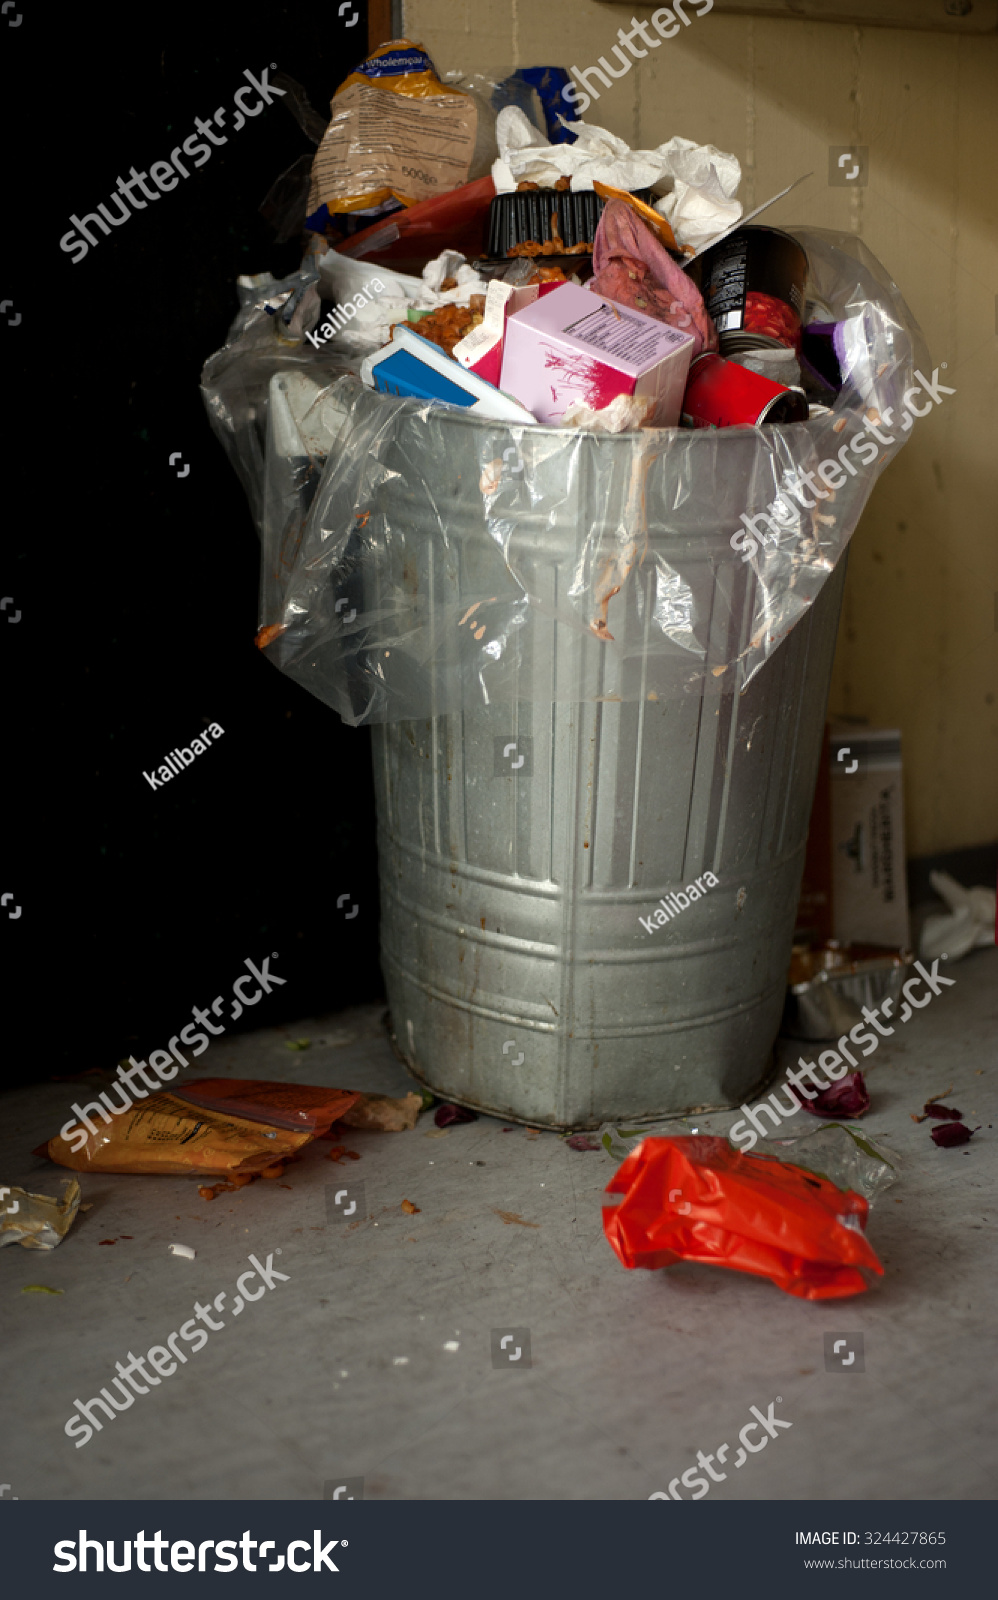 Download Full Trash Bin Looking Ugly Abstract Stock Image 324427865 Yellowimages Mockups